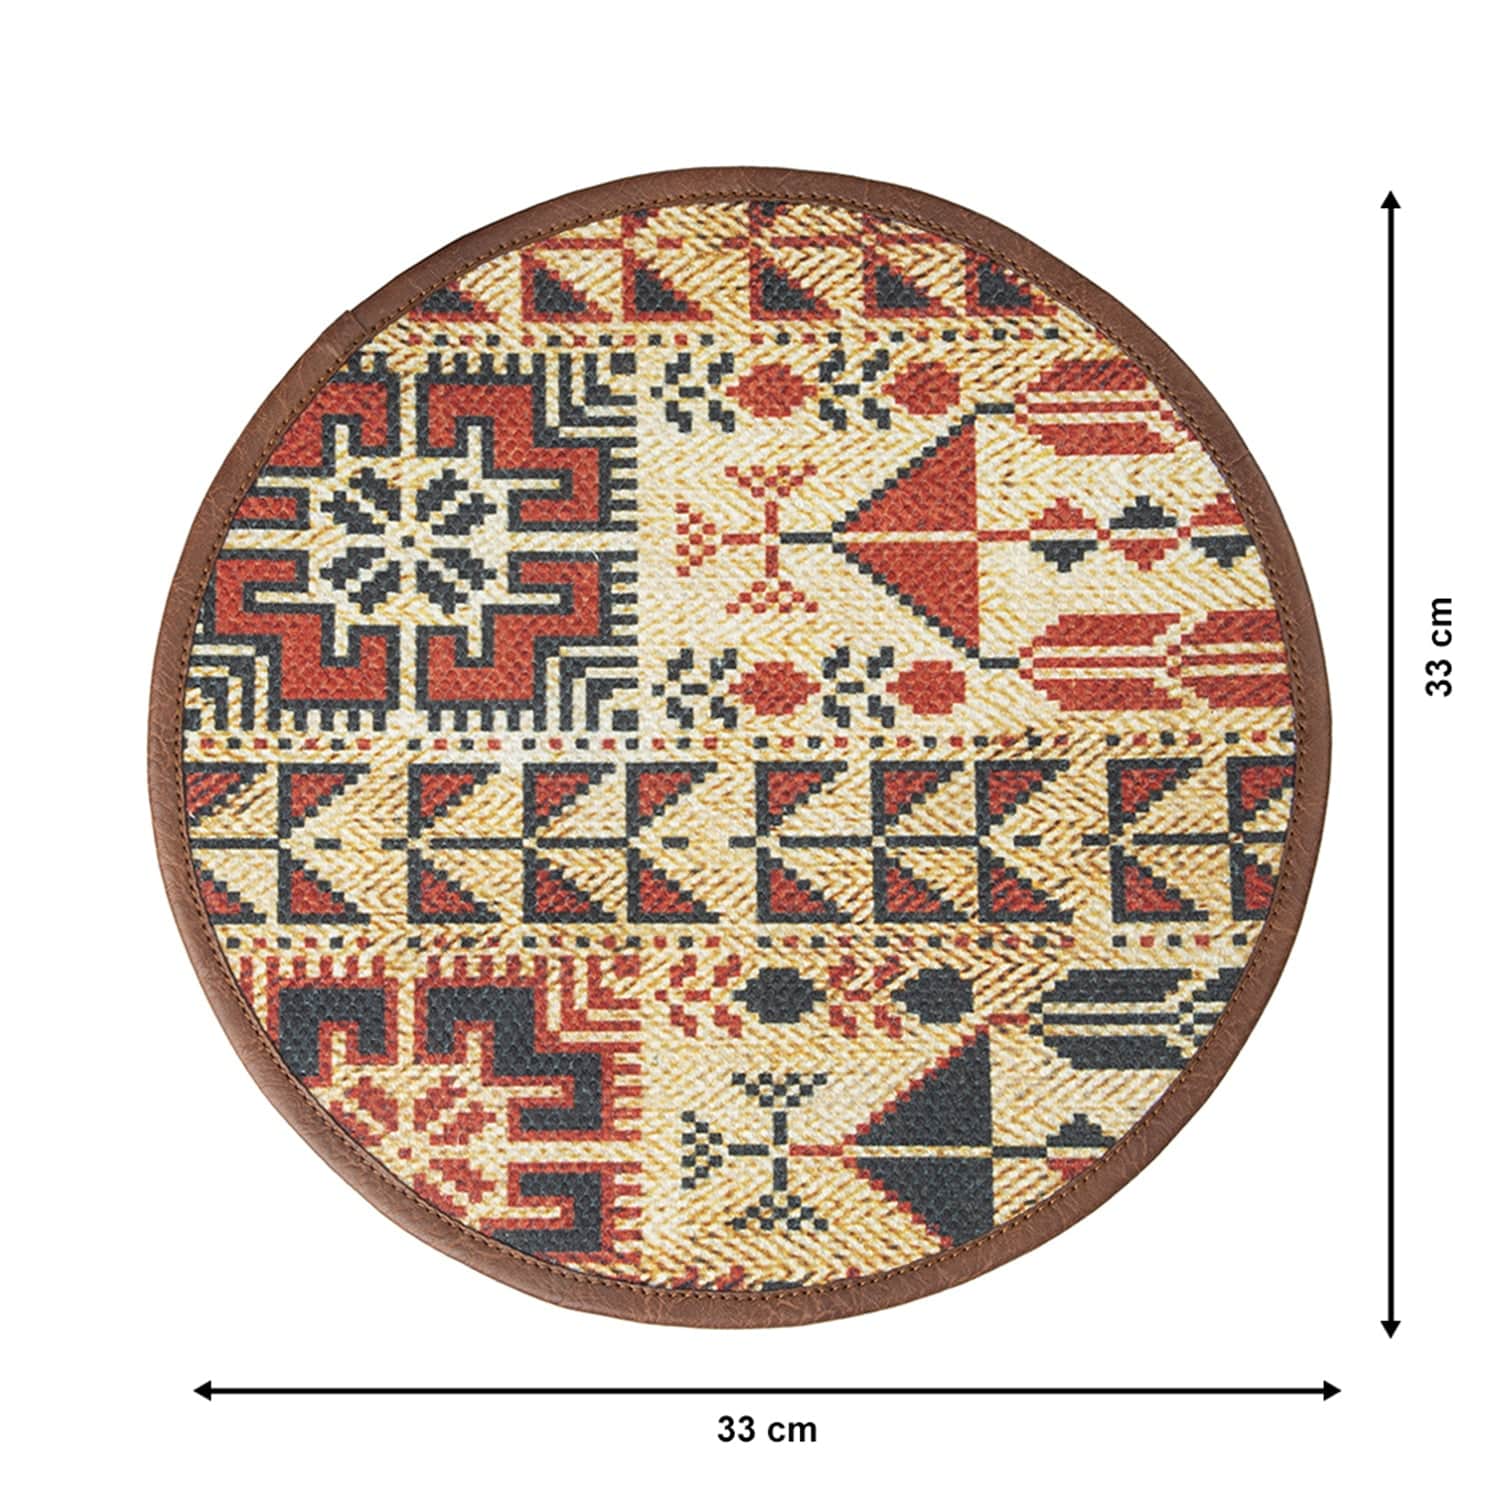 Mona B Set of 2 Printed Mosaic Placemats, 13 INCH Round, Best for Bed-Side Table/Center Table, Dining Table/Shelves (Mosaic) - Placemat by Mona-B - Backpack, Flat30, New Arrivals, Sale, Shop1999, Shop2999, Shop3999